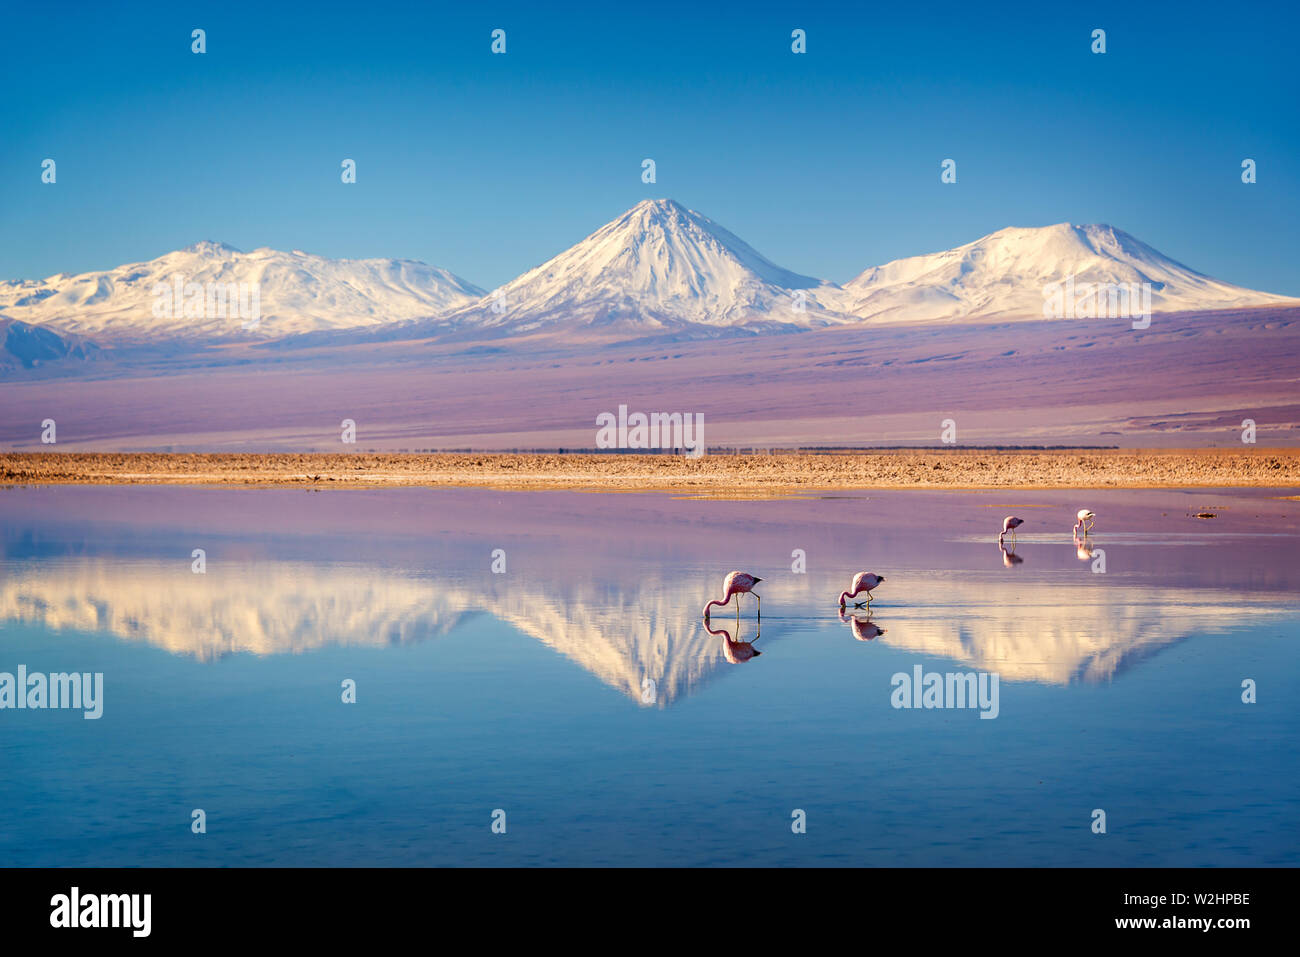 Snowy Licancabur volcano in Andes montains reflecting in the wate of Laguna Chaxa with Andean flamingos, Atacama salar, Chile Stock Photo